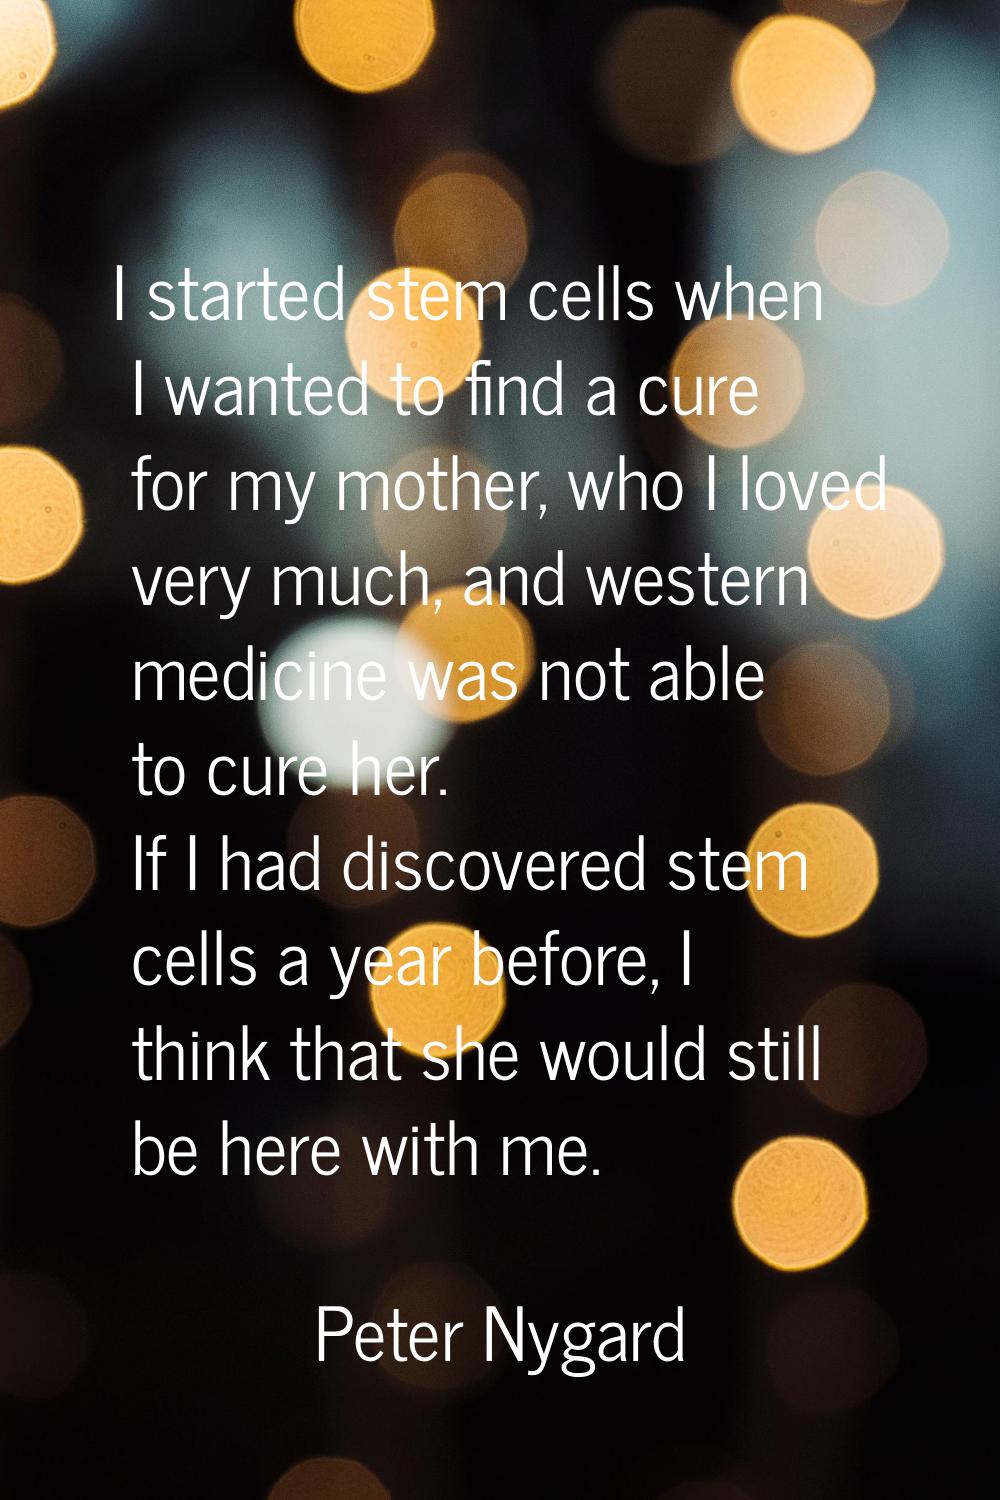 I started stem cells when I wanted to find a cure for my mother, who I loved very much, and western